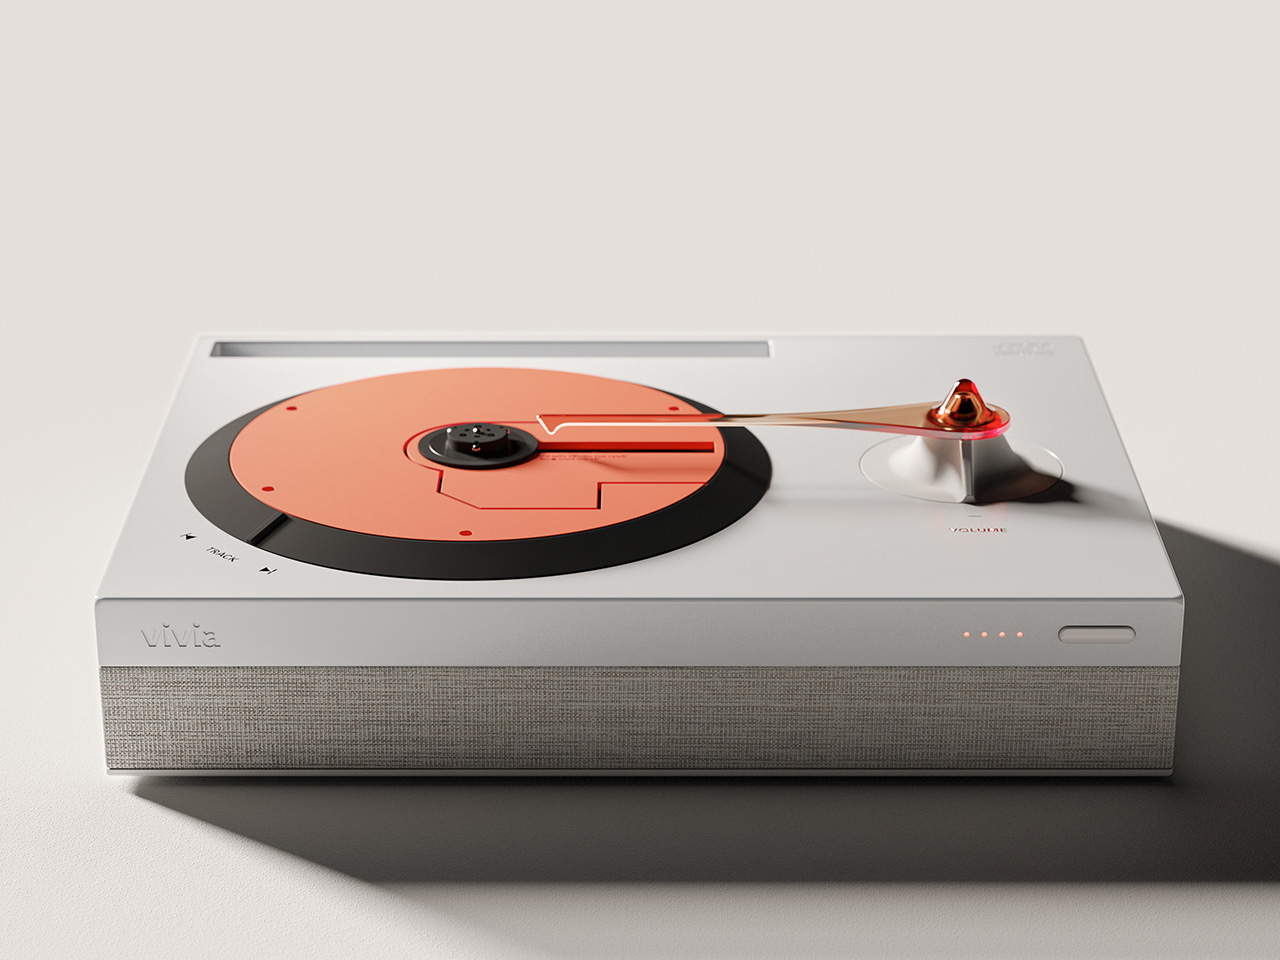 This CD Playing Turntable Pairs Analog Aesthetics With Digital Fidelity